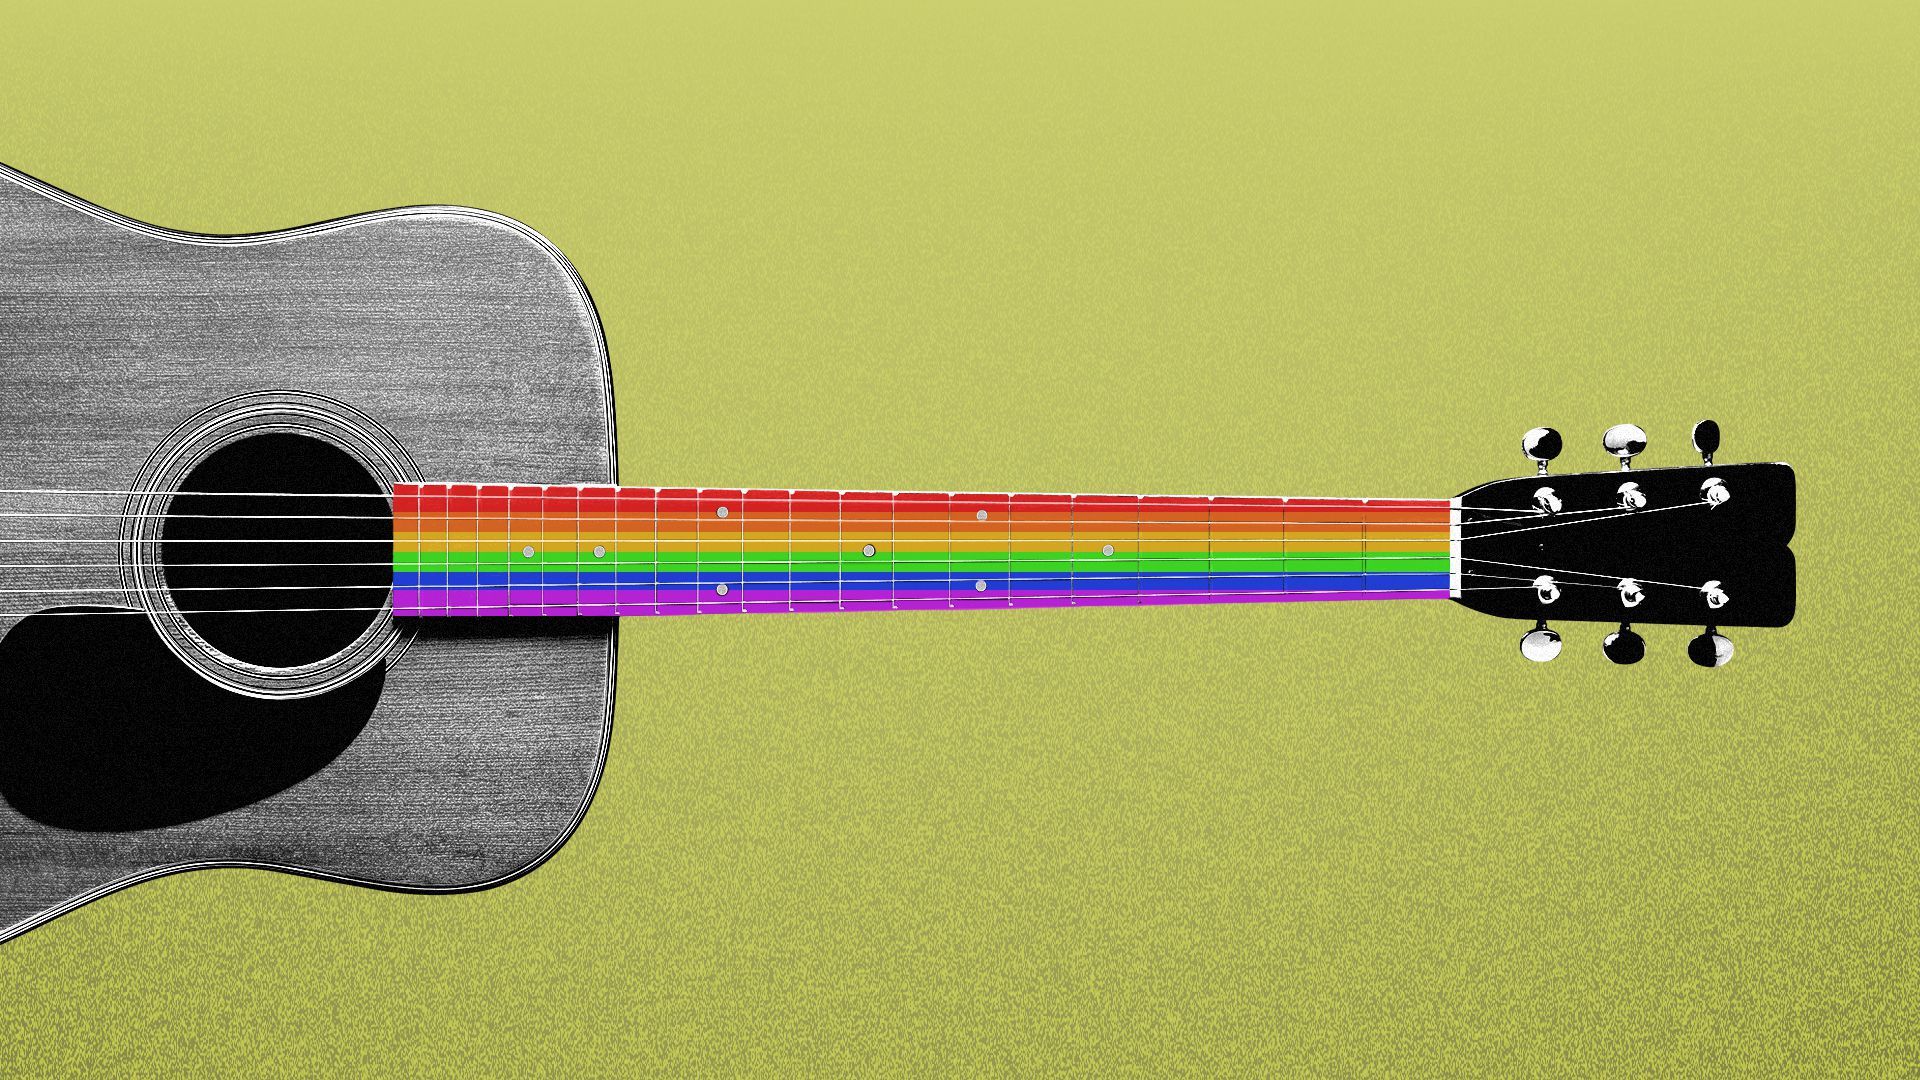 Illustration of an acoustic guitar with a rainbow fretboard.